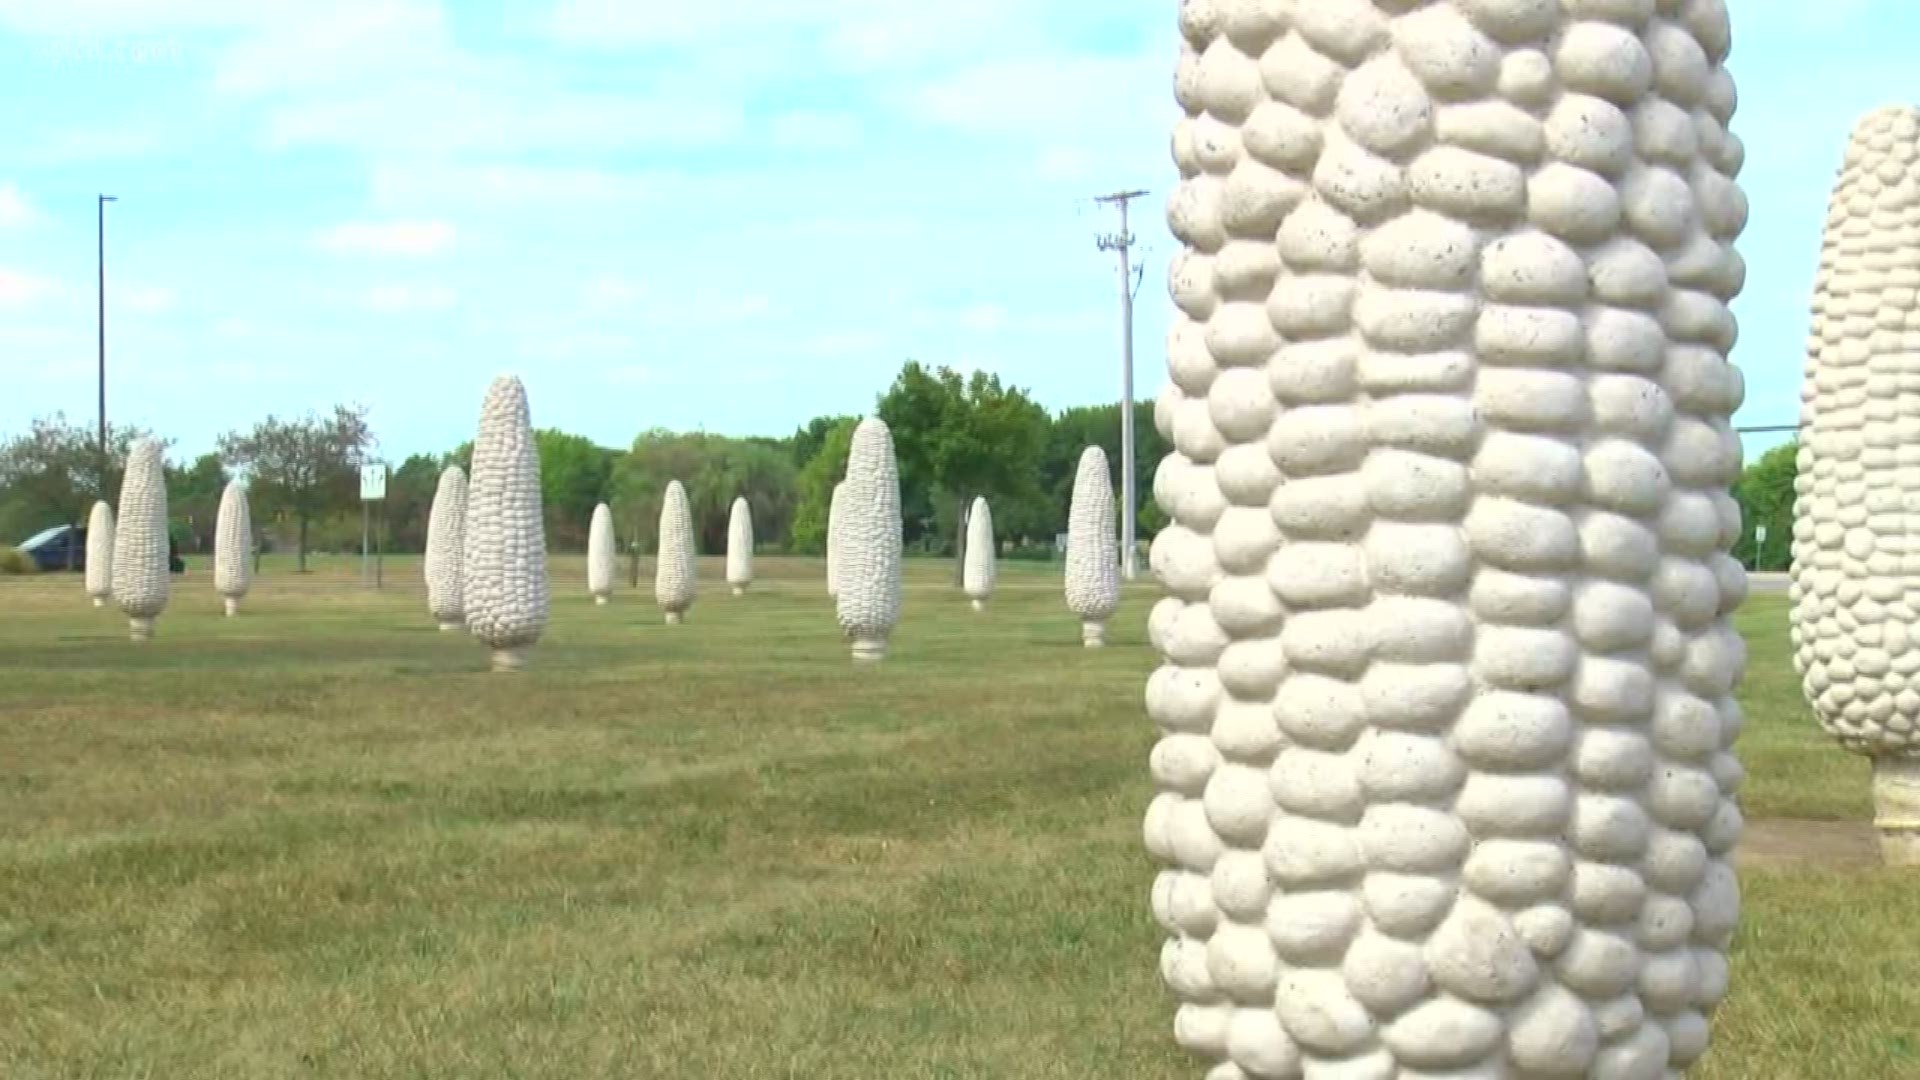 A field filled with 109 concrete ears of corn finds home in Dublin.